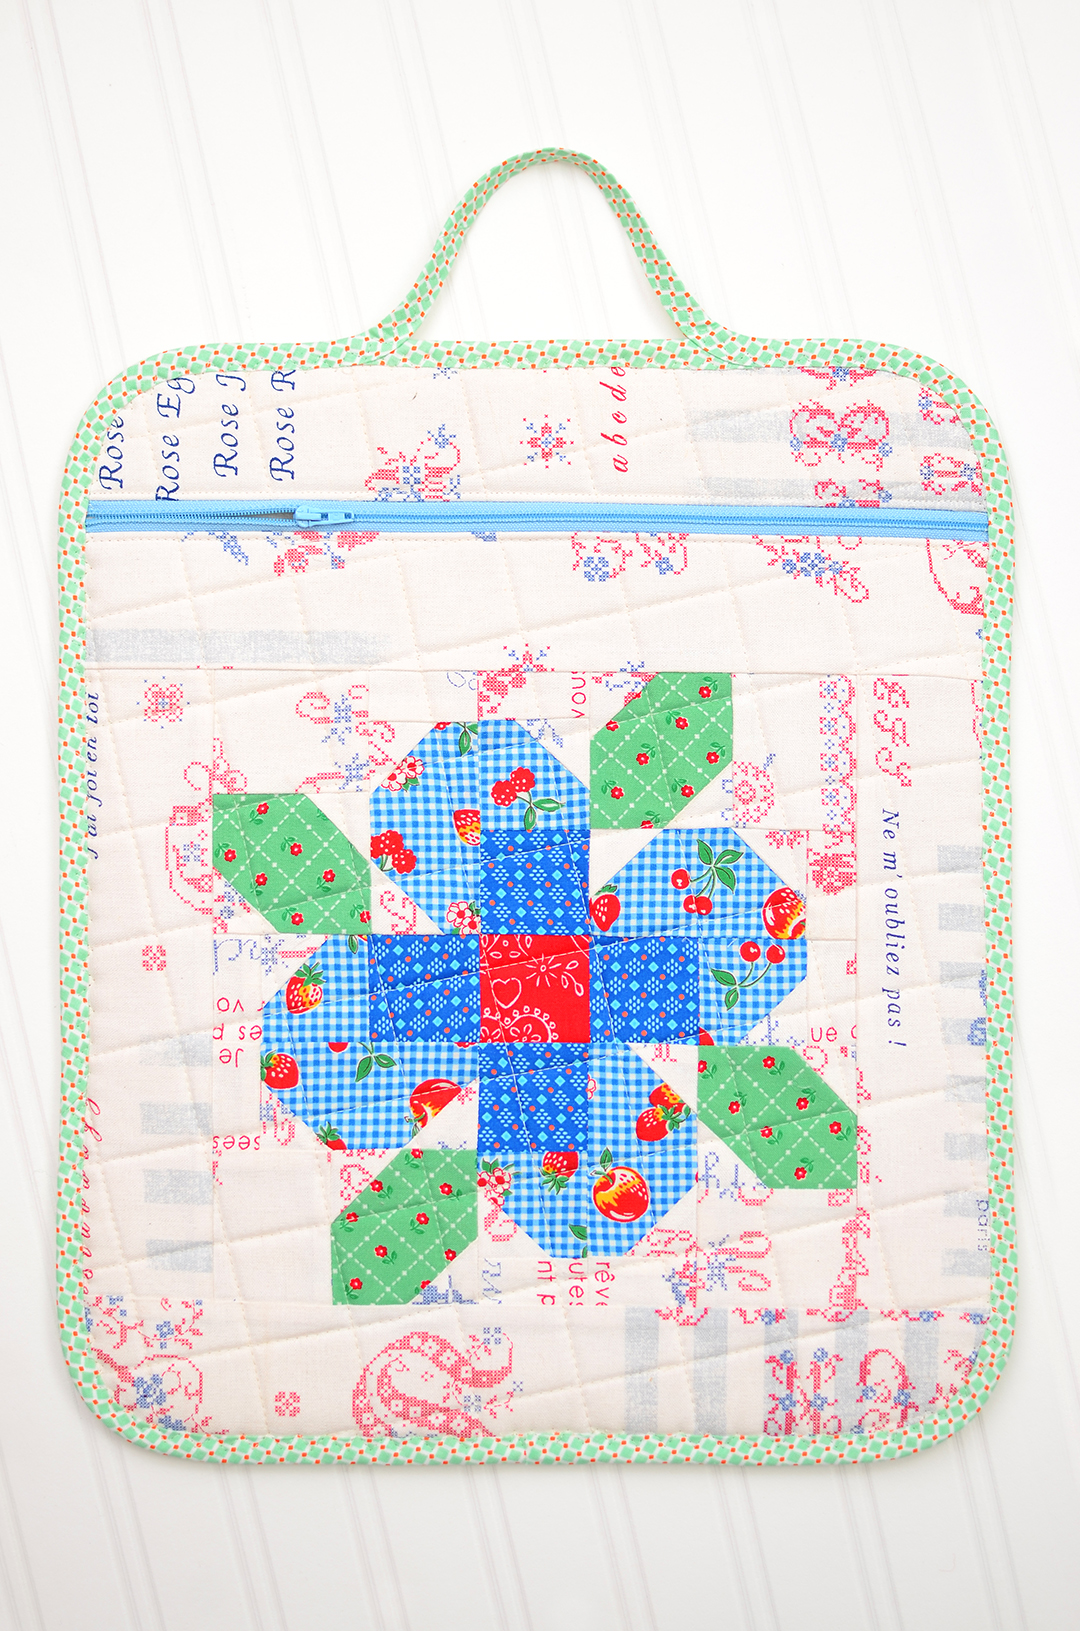 Quilted Gift Bag Pattern - An easy quilt pattern add-on by Nadra Ridgeway of ellis & higgs